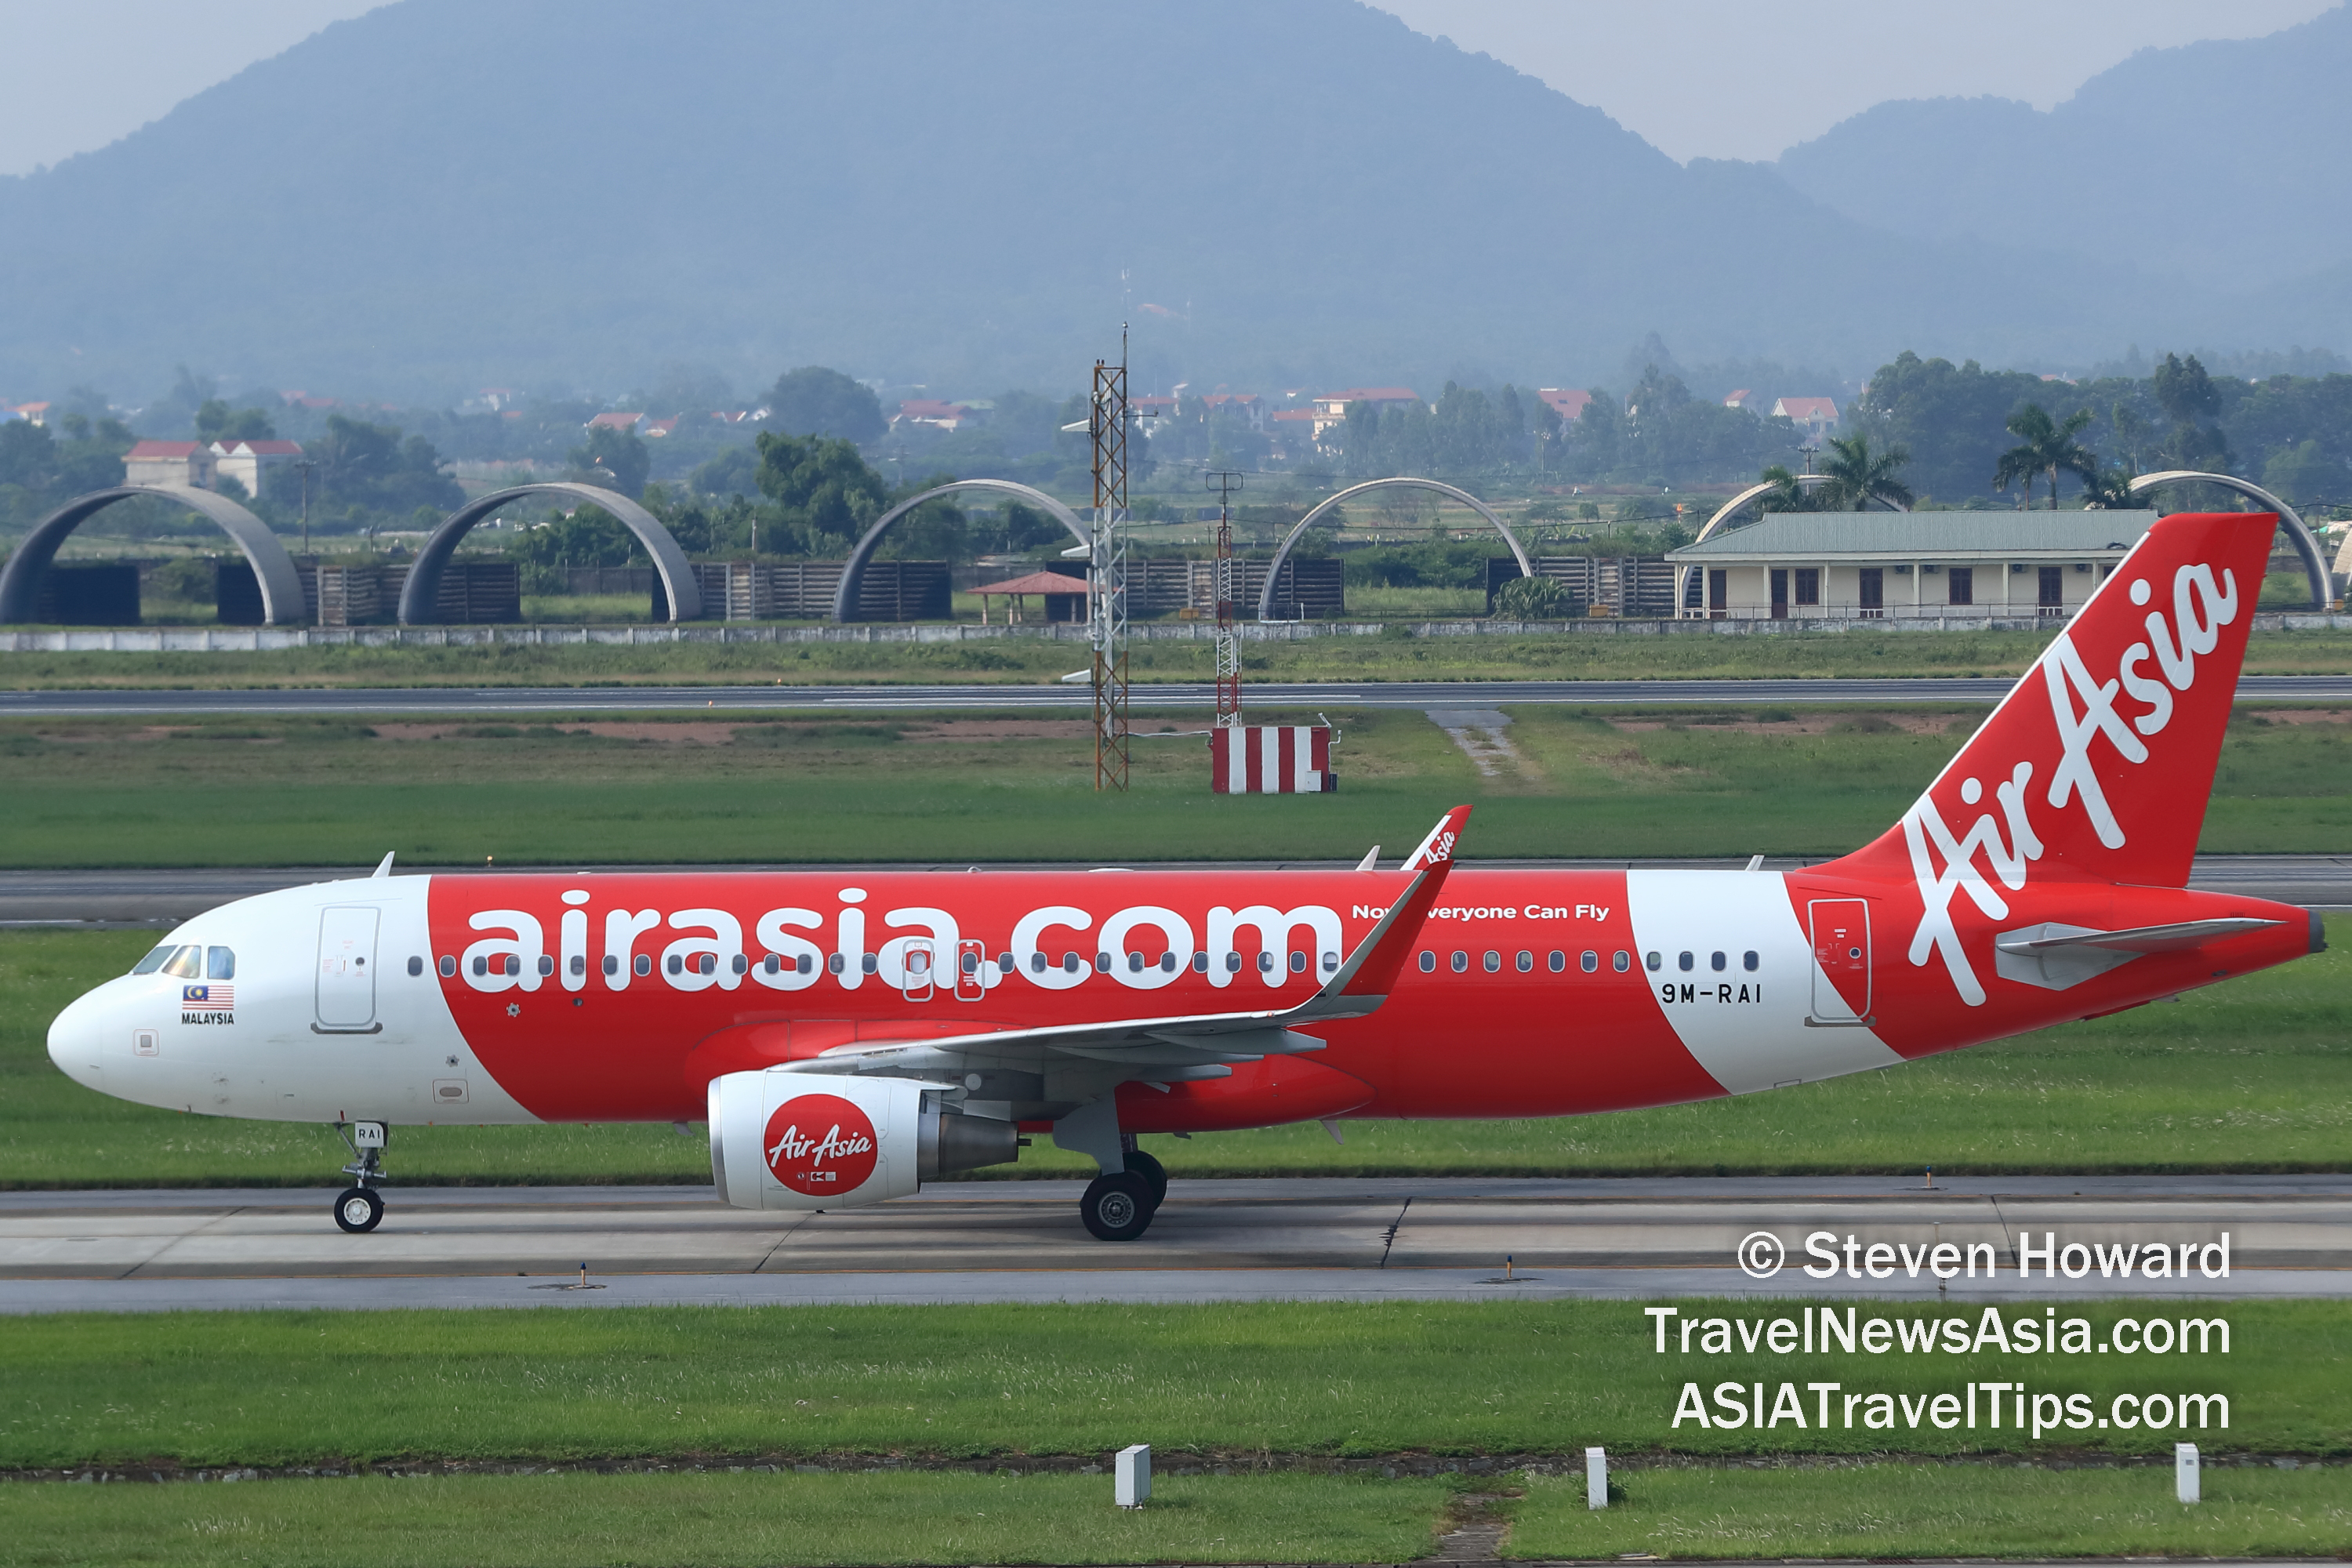 AirAsia Airbus A320 reg: 9M-RAI. Picture by Steven Howard of TravelNewsAsia.com Click to enlarge.